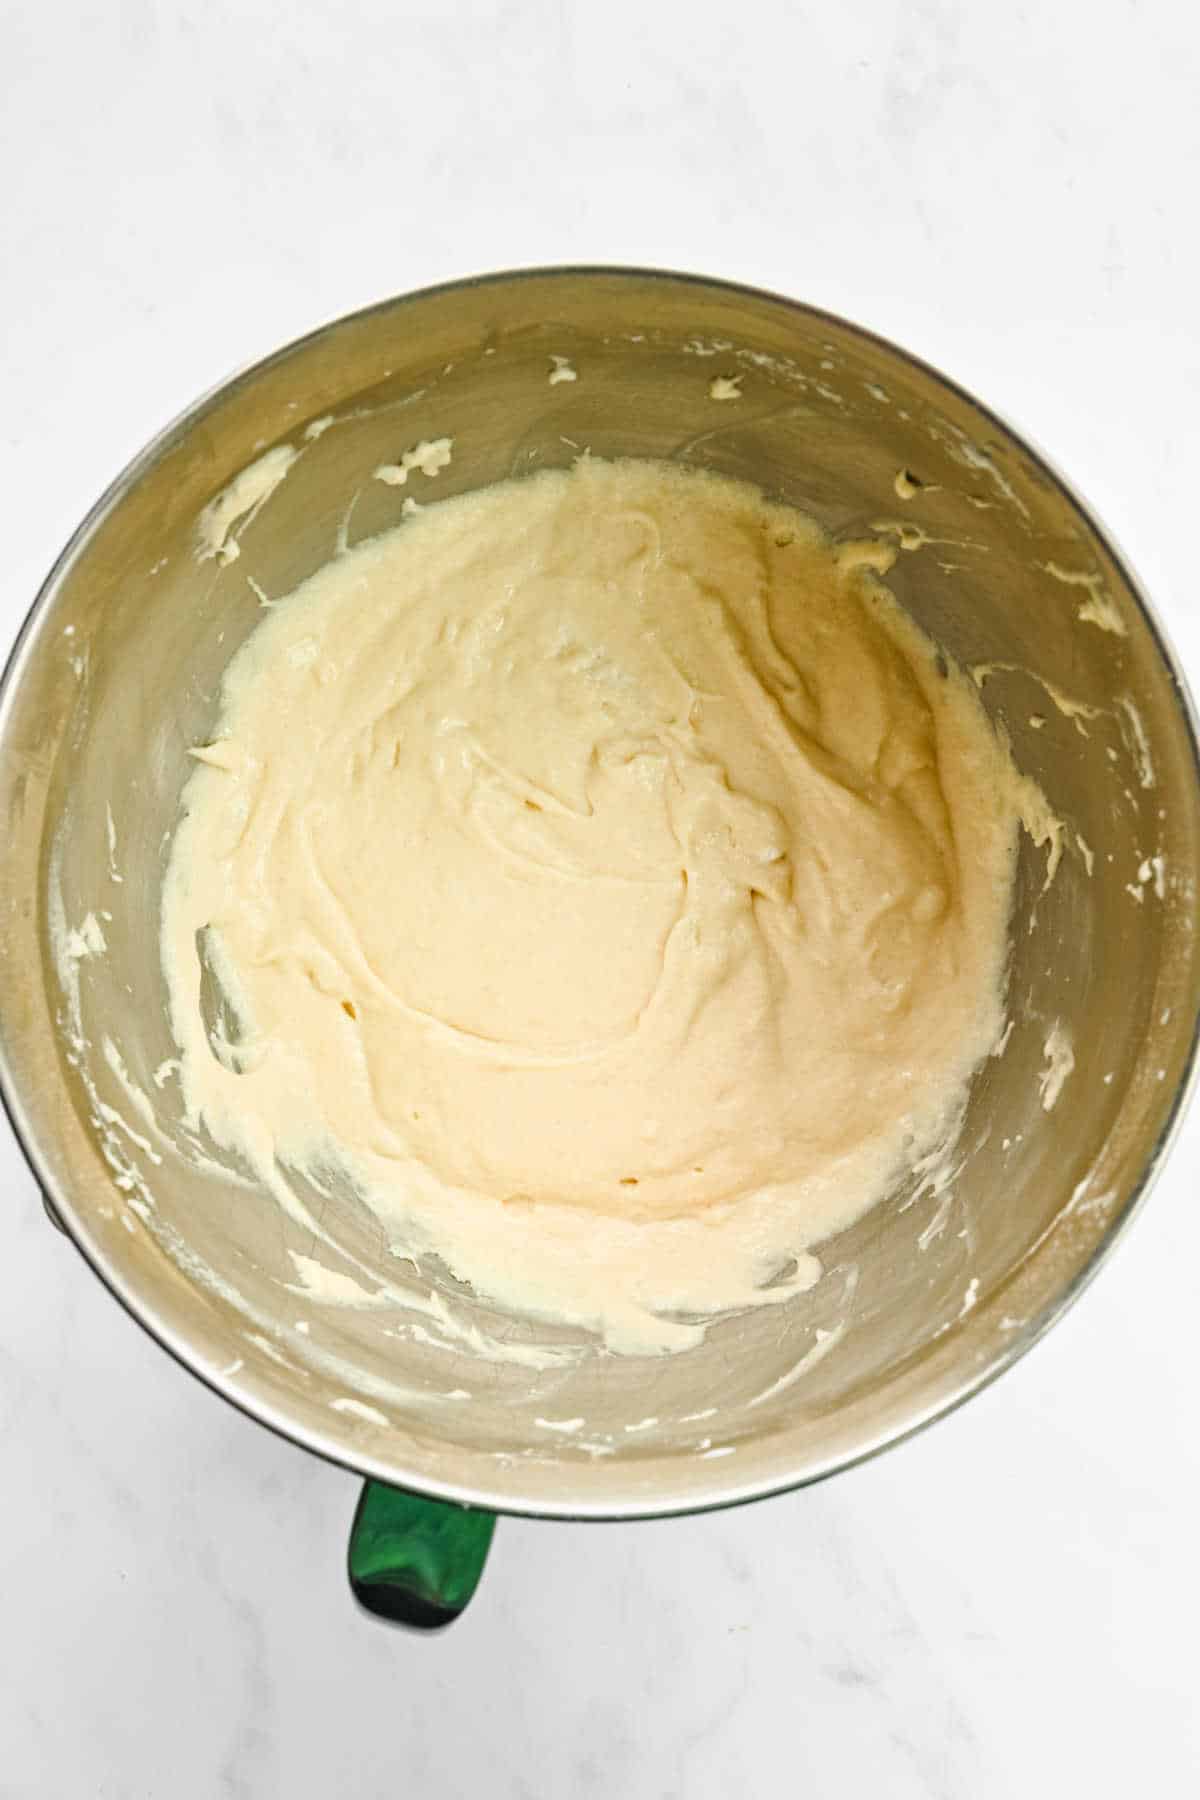 White chocolate beaten into creamed butter mixture. 